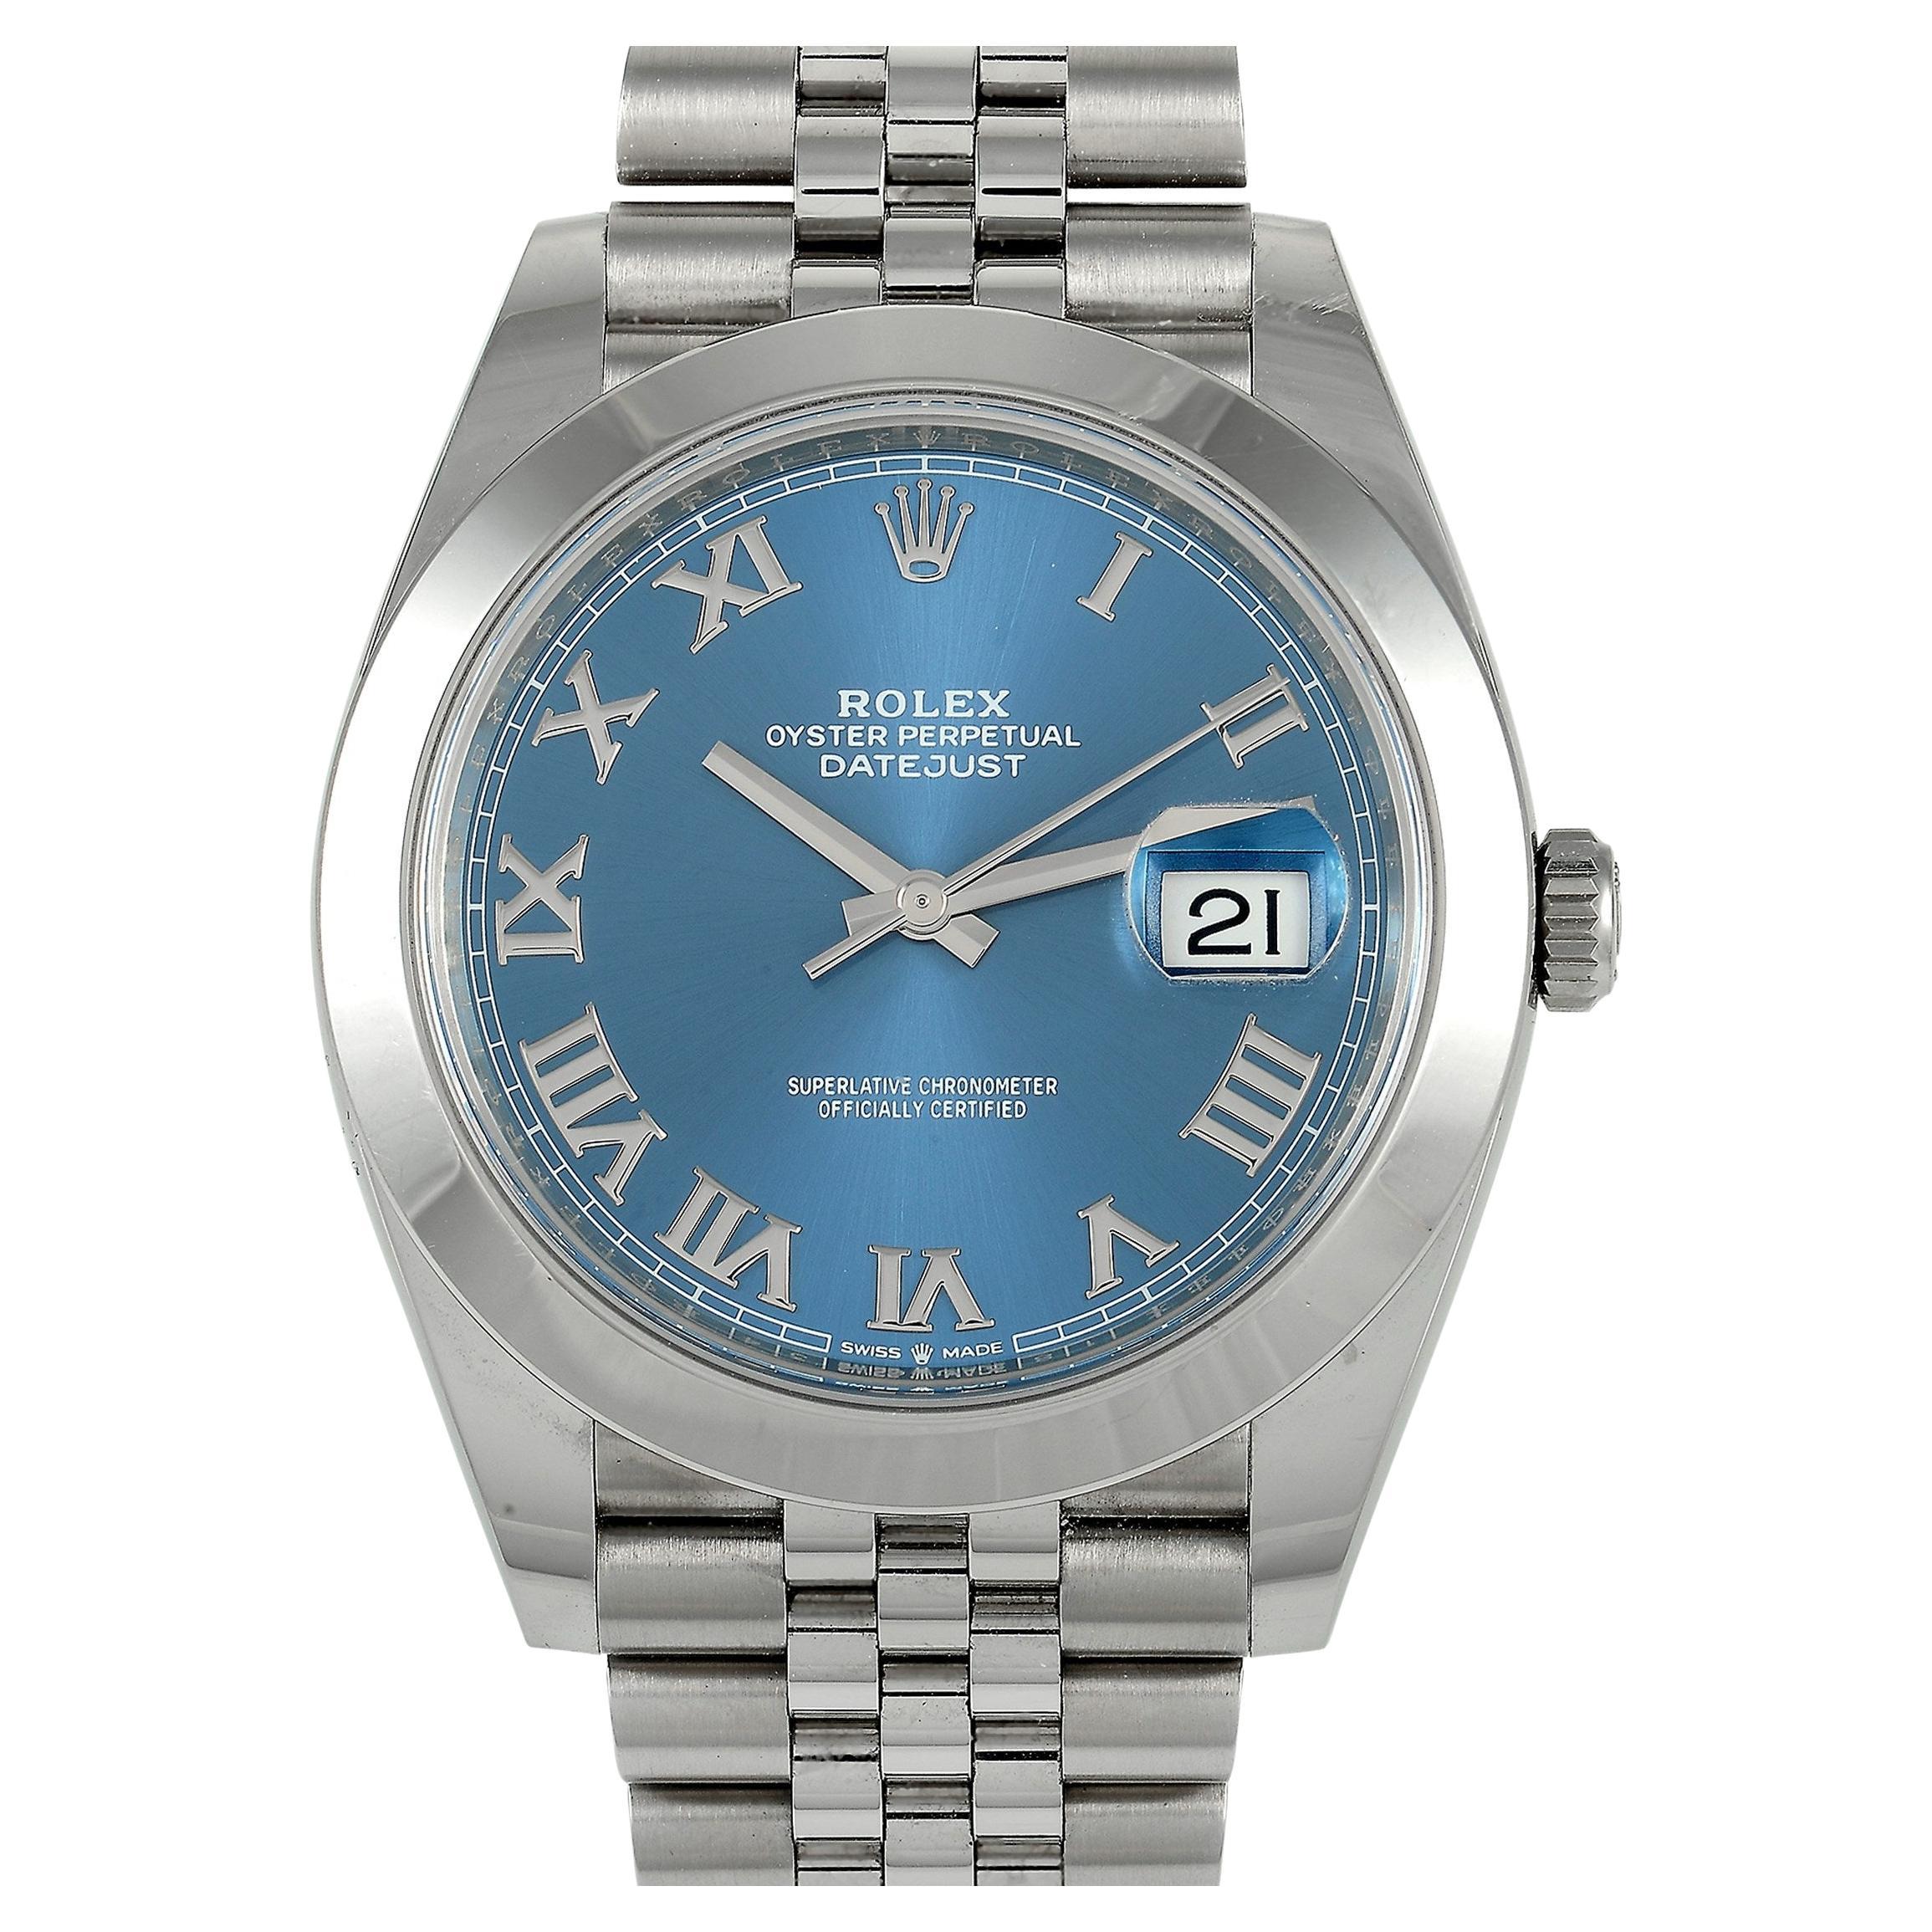 Rolex Datejust Blue Dial Stainless Steel Watch 126300